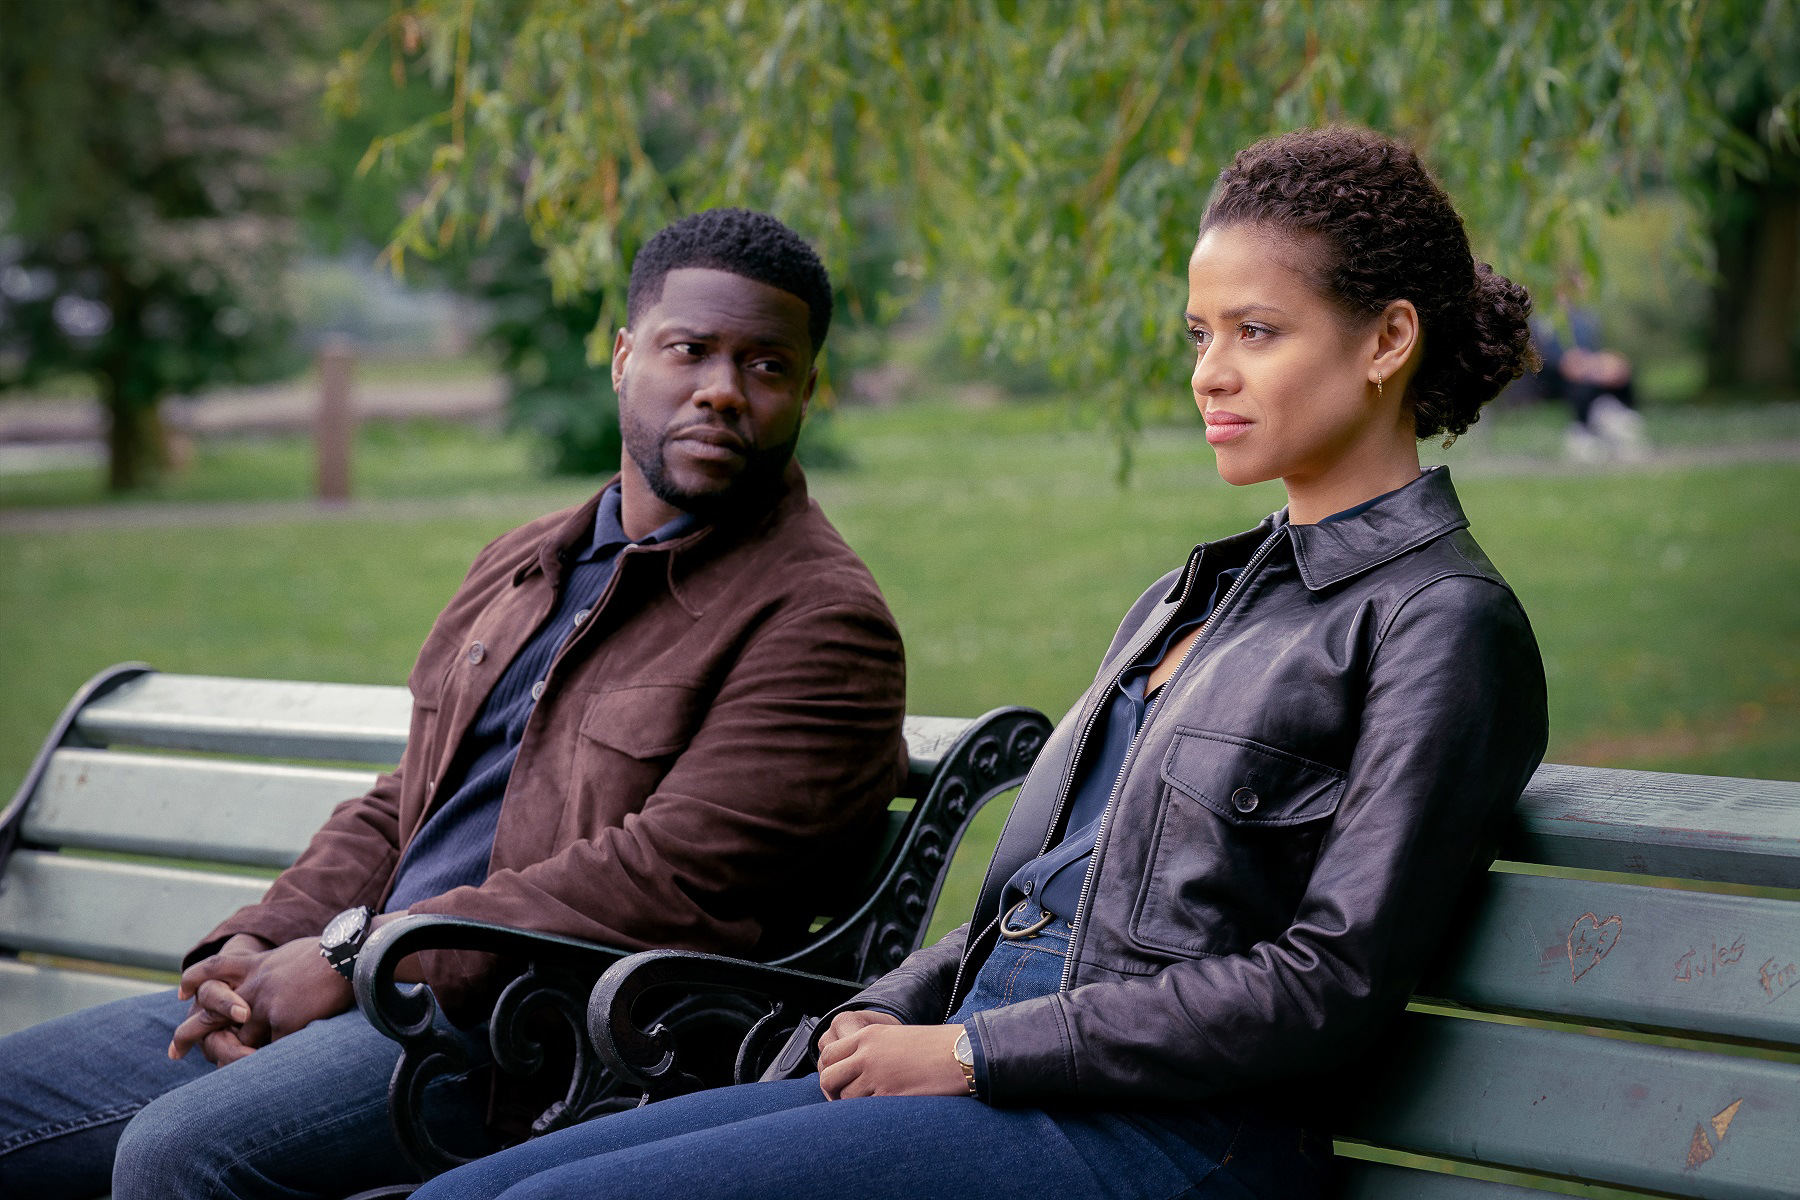 Lift movie release date for new Kevin Hart movie on Netflix, trailer